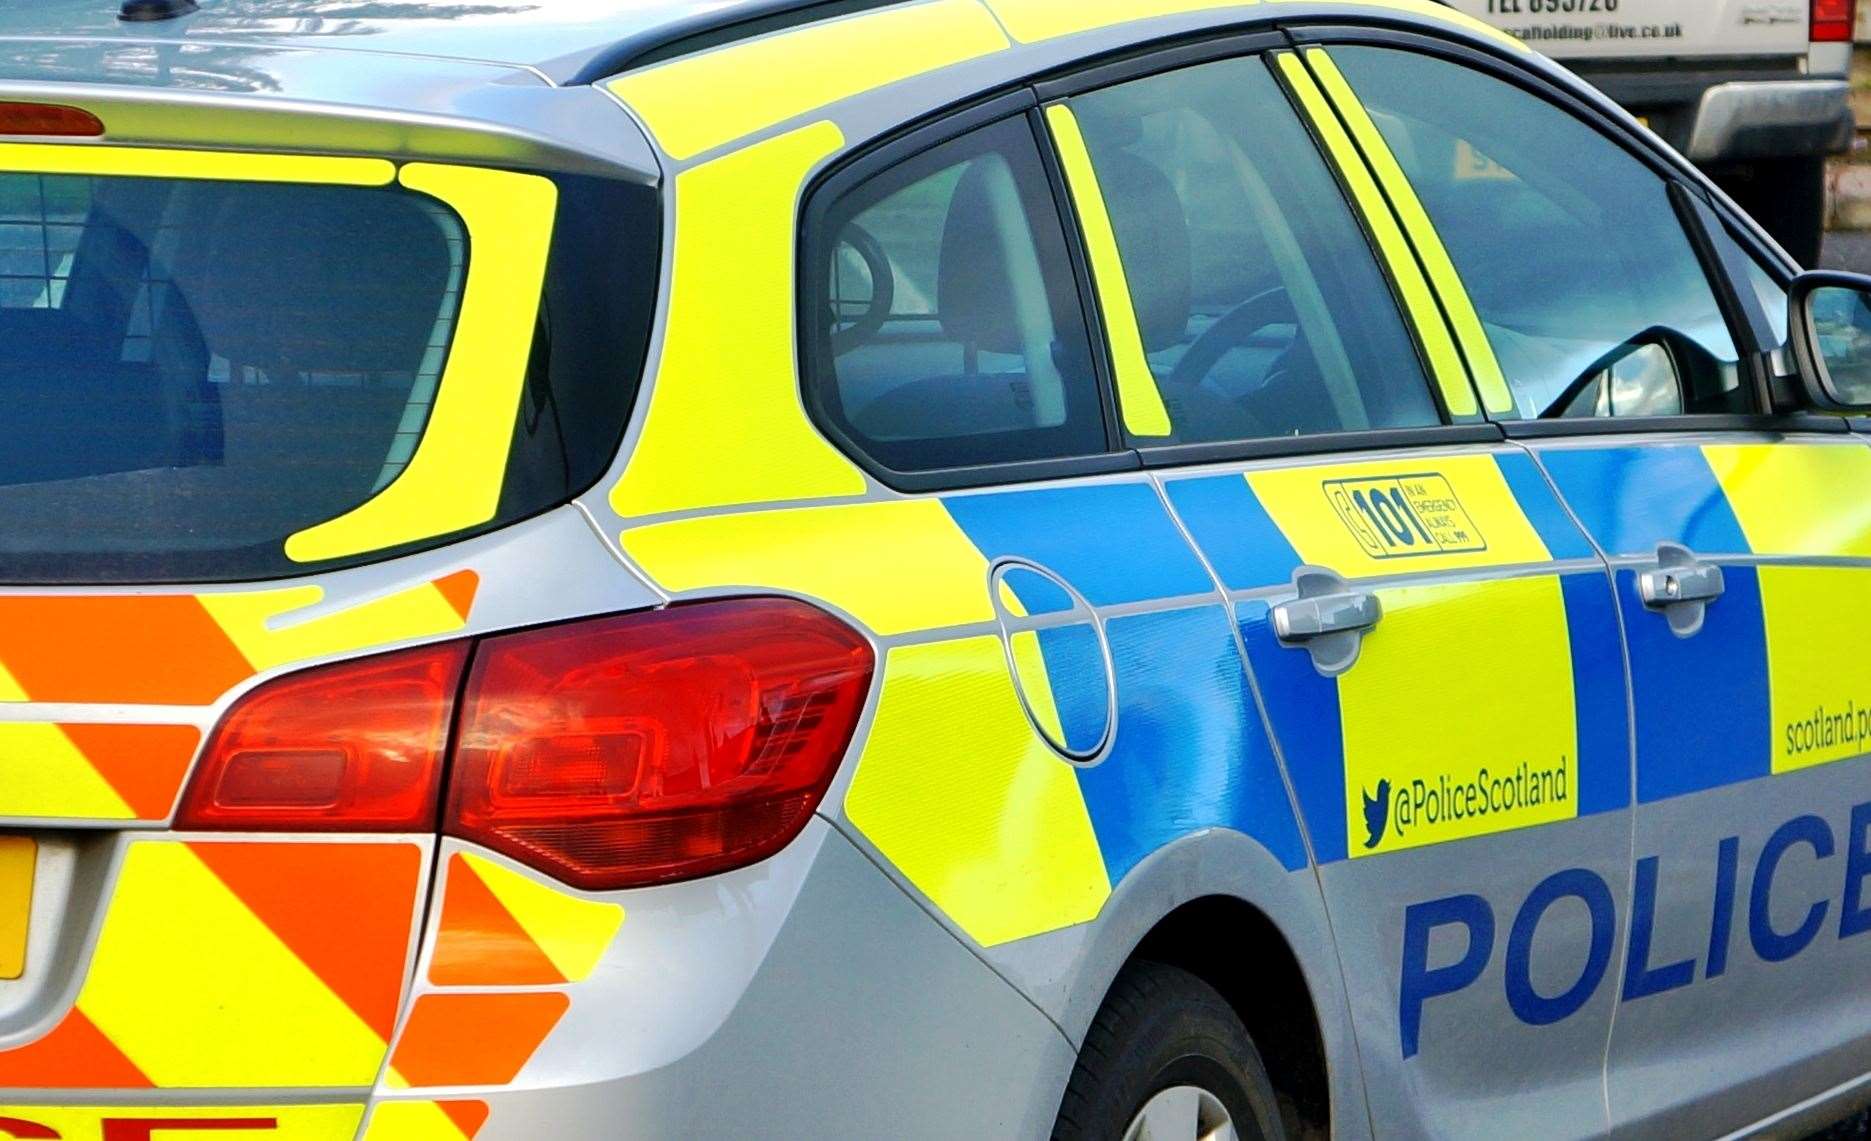 Police are appealing for more information following a break-in in Inverness.